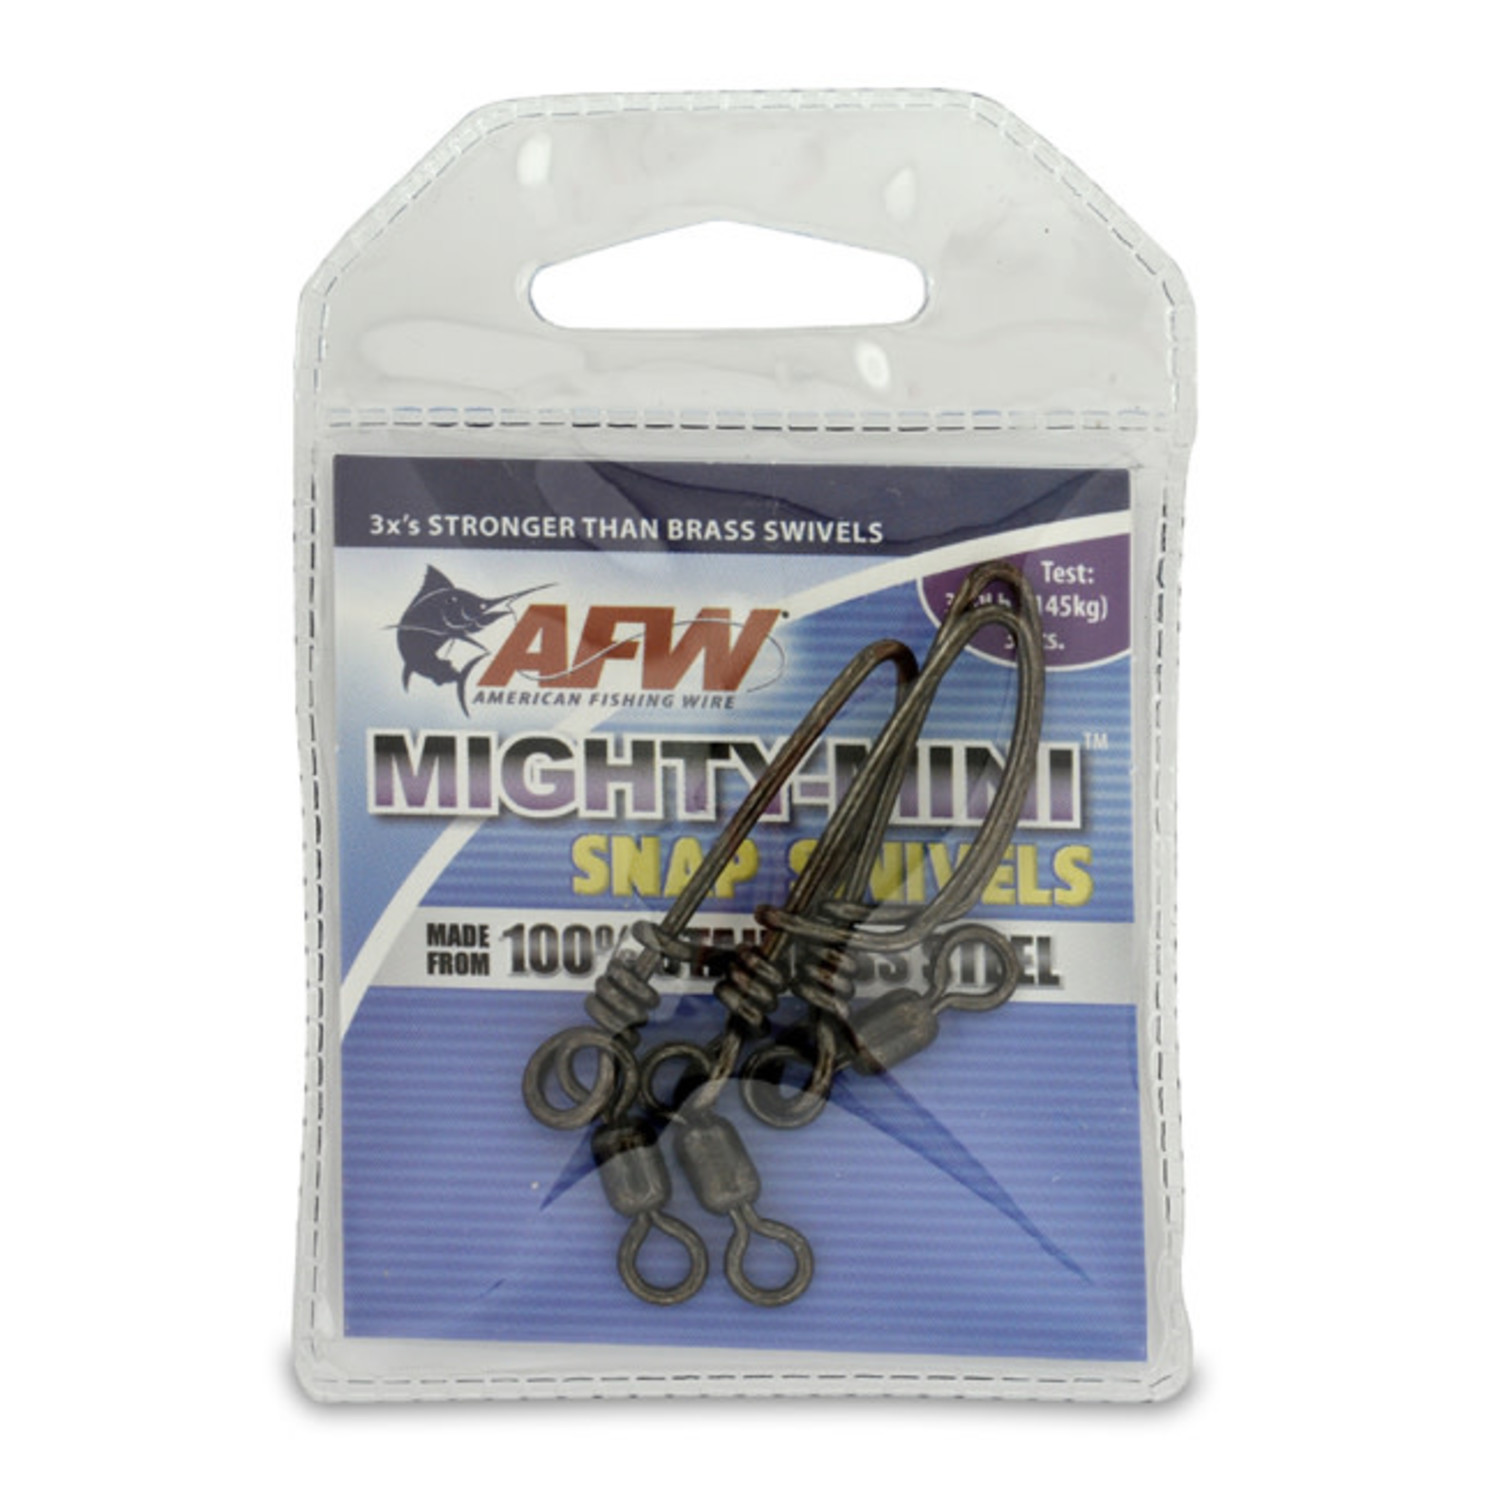 American Fishing Wire AFW Mighty Mini Stainless Steel Snap Swivels -  Gunmetal Black